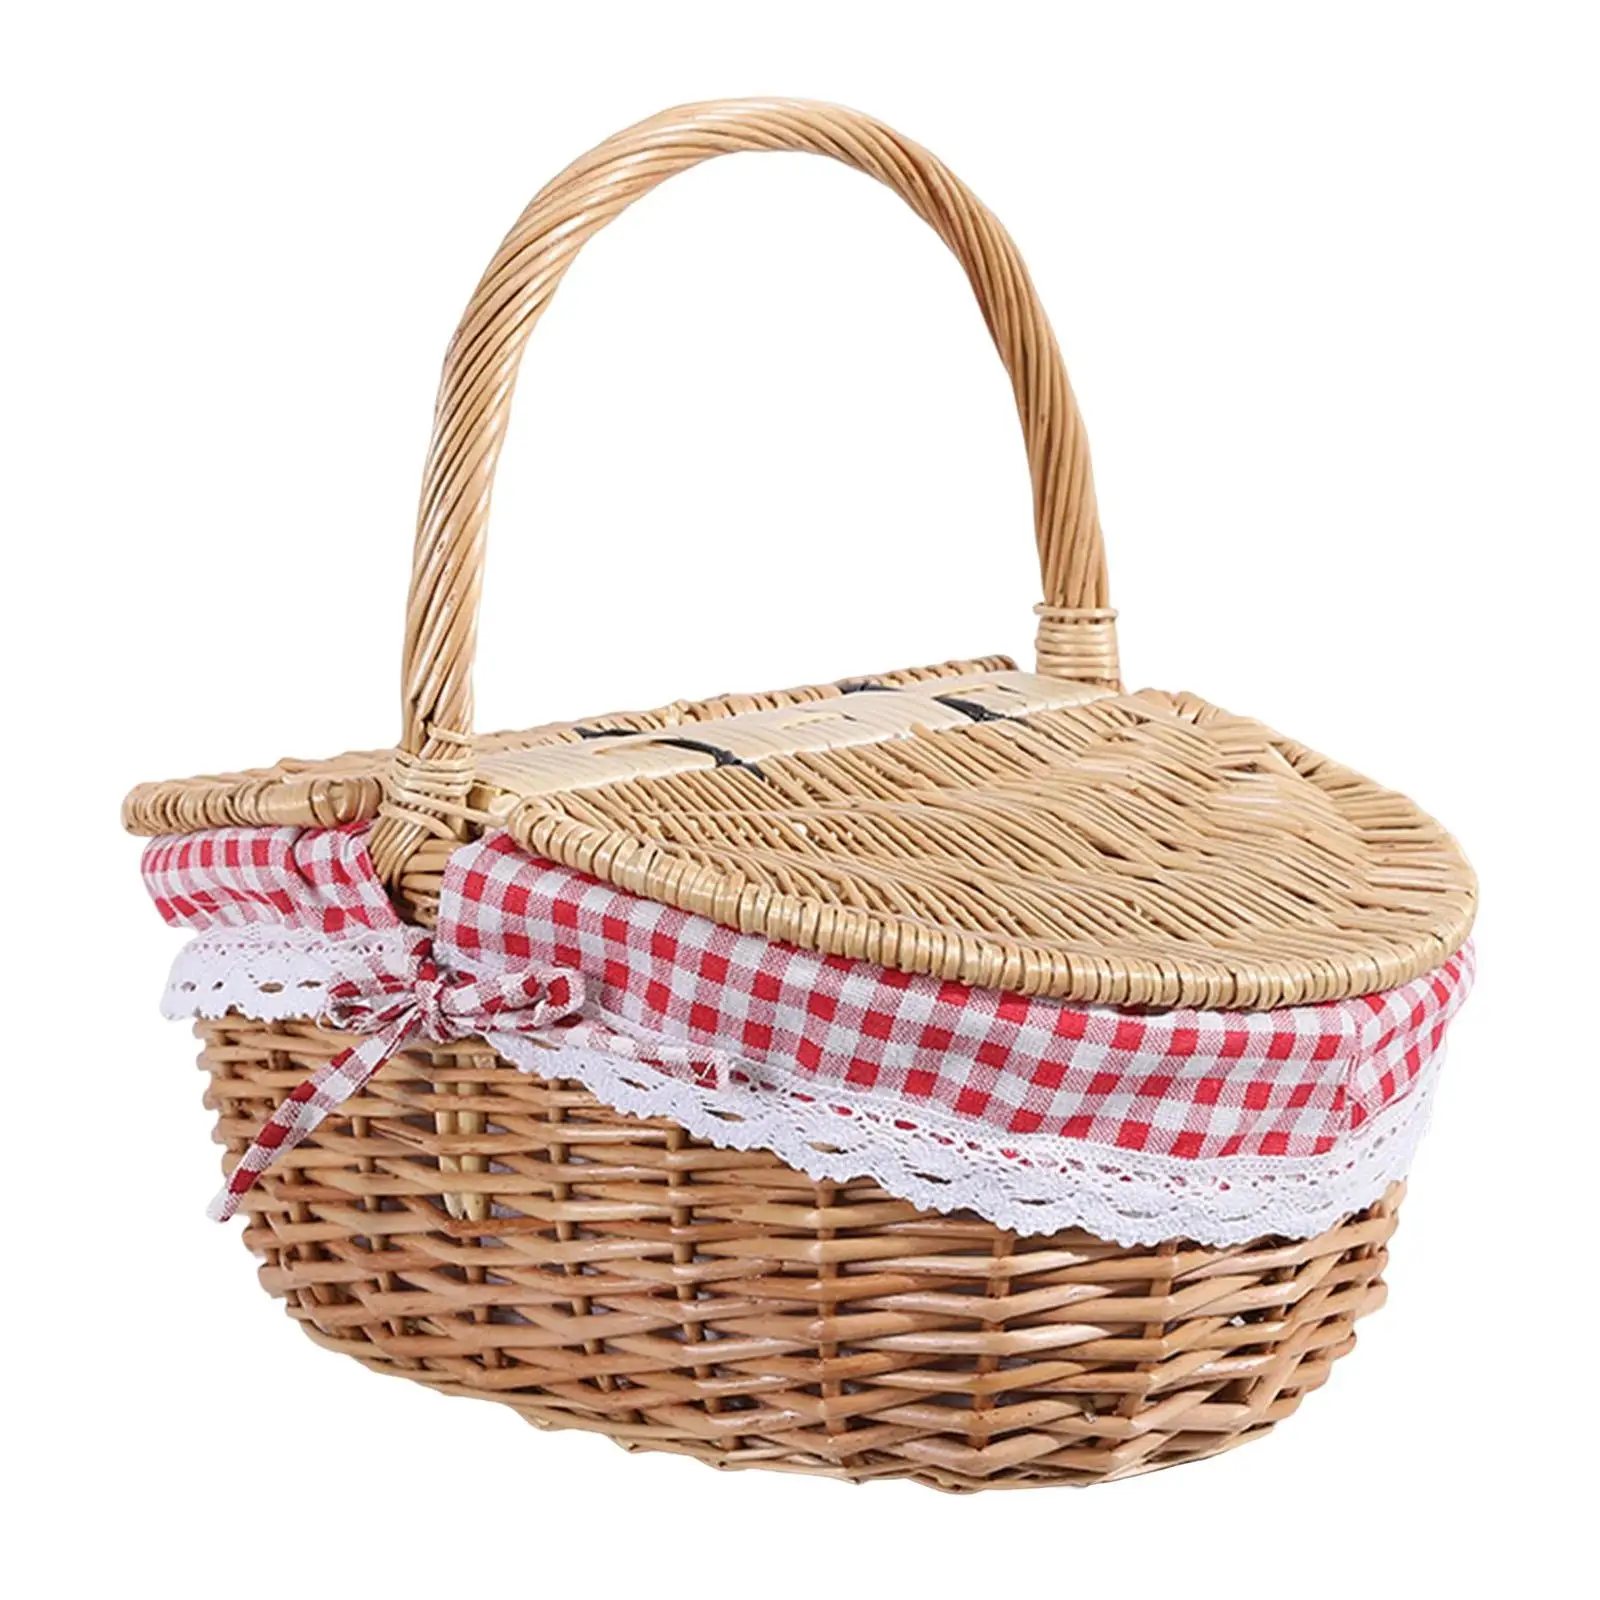 Wicker Picnic Basket Storage Hamper, with Lid Handle Shopping Basket, Container for Camping